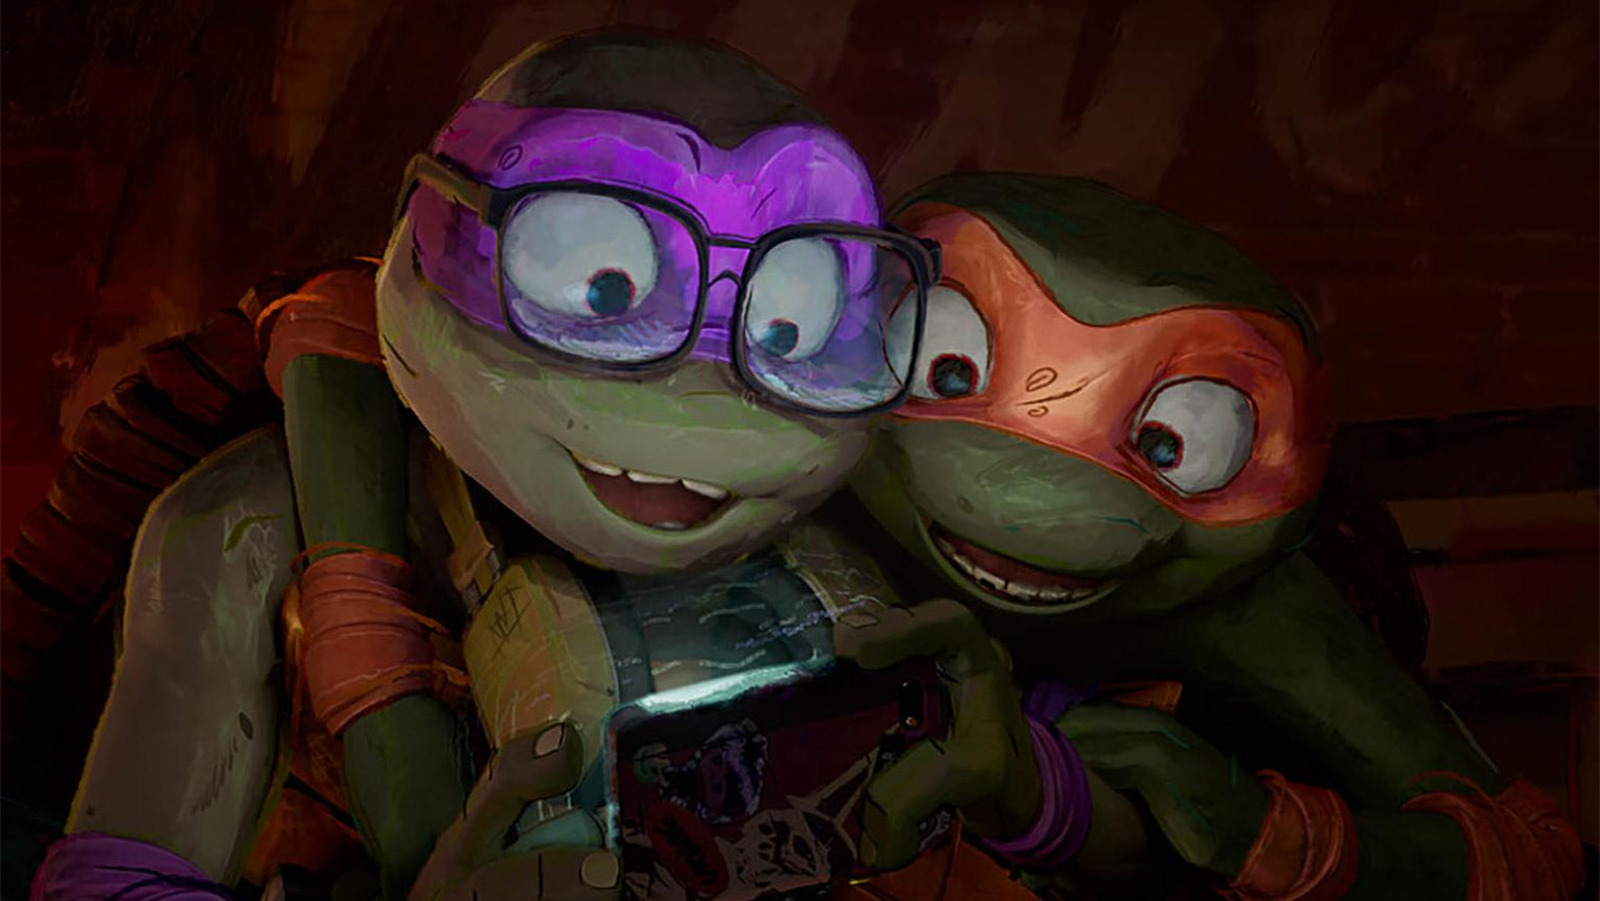 https://www.slashfilm.com/img/gallery/tmnt-mutant-mayhems-cleverest-easter-egg-references-a-classic-toy-exclusive/l-intro-1691077507.jpg